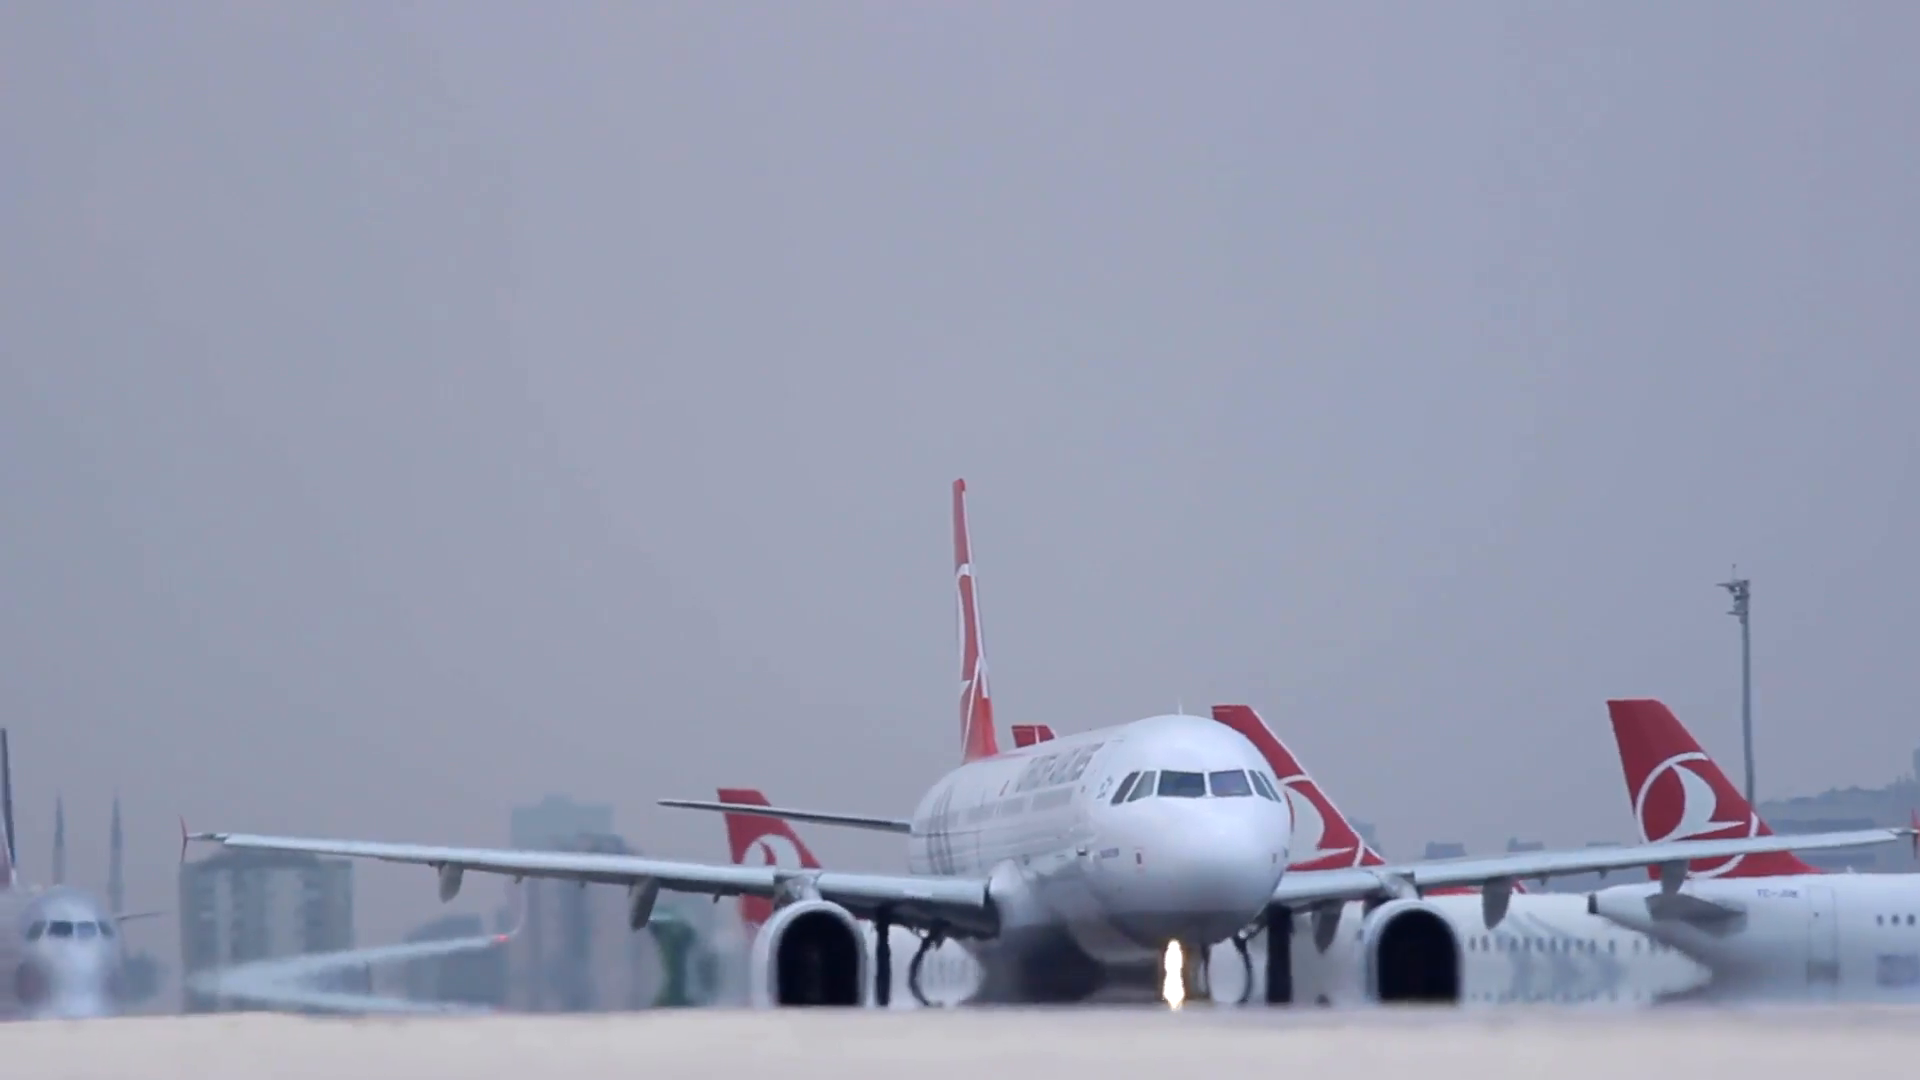 Airplanes line-up on a runway waiting to take off - Istanbul Ataturk ...